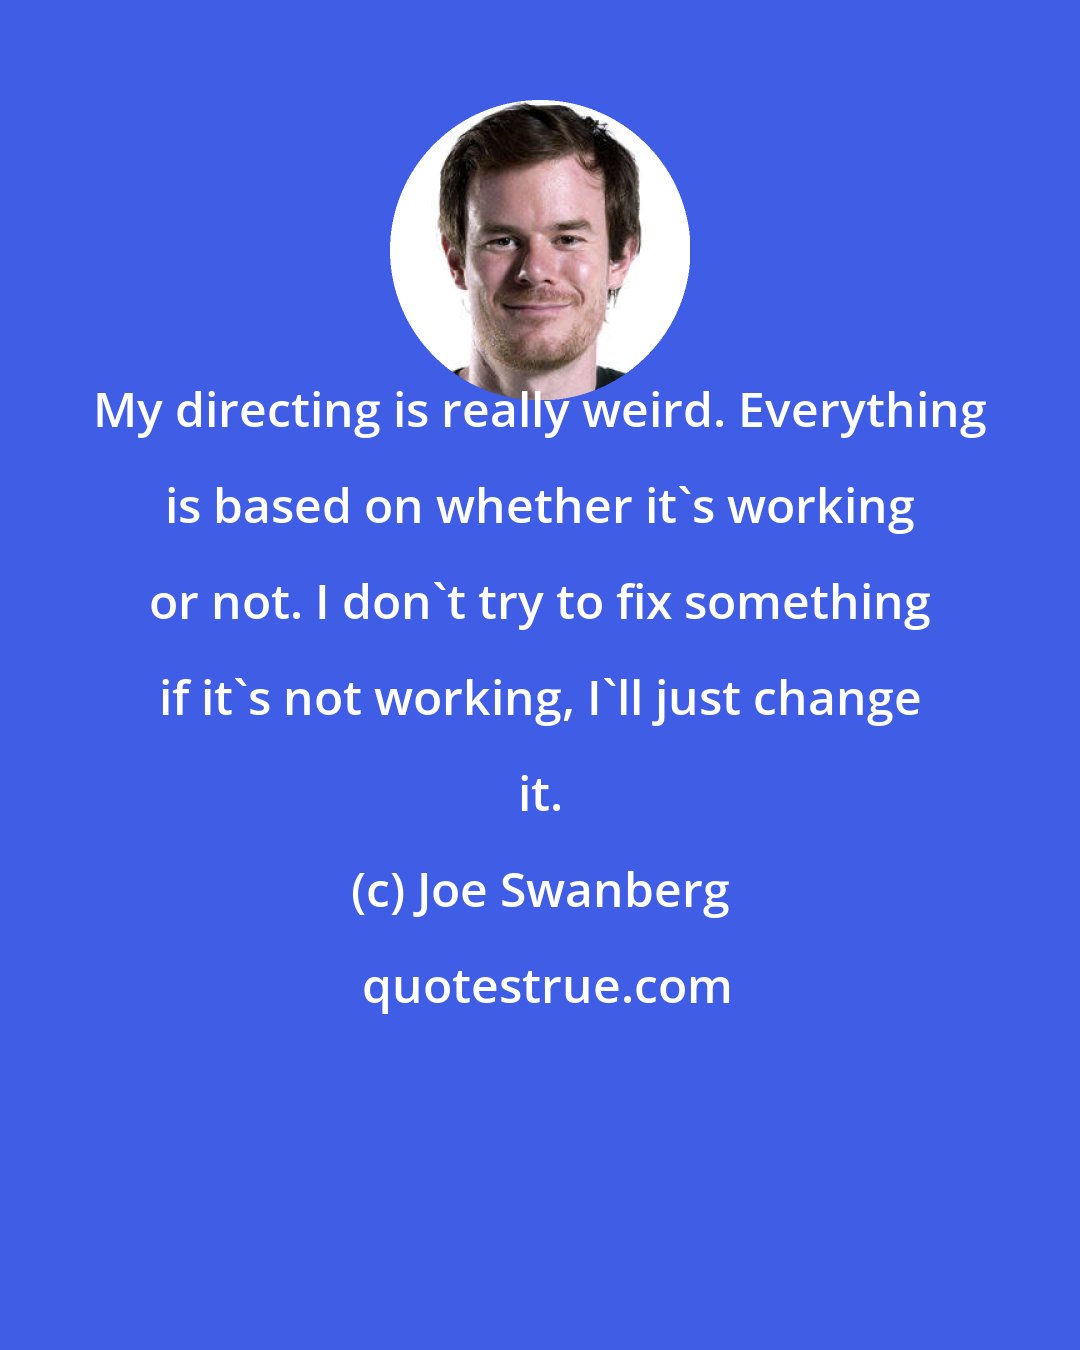 Joe Swanberg: My directing is really weird. Everything is based on whether it's working or not. I don't try to fix something if it's not working, I'll just change it.